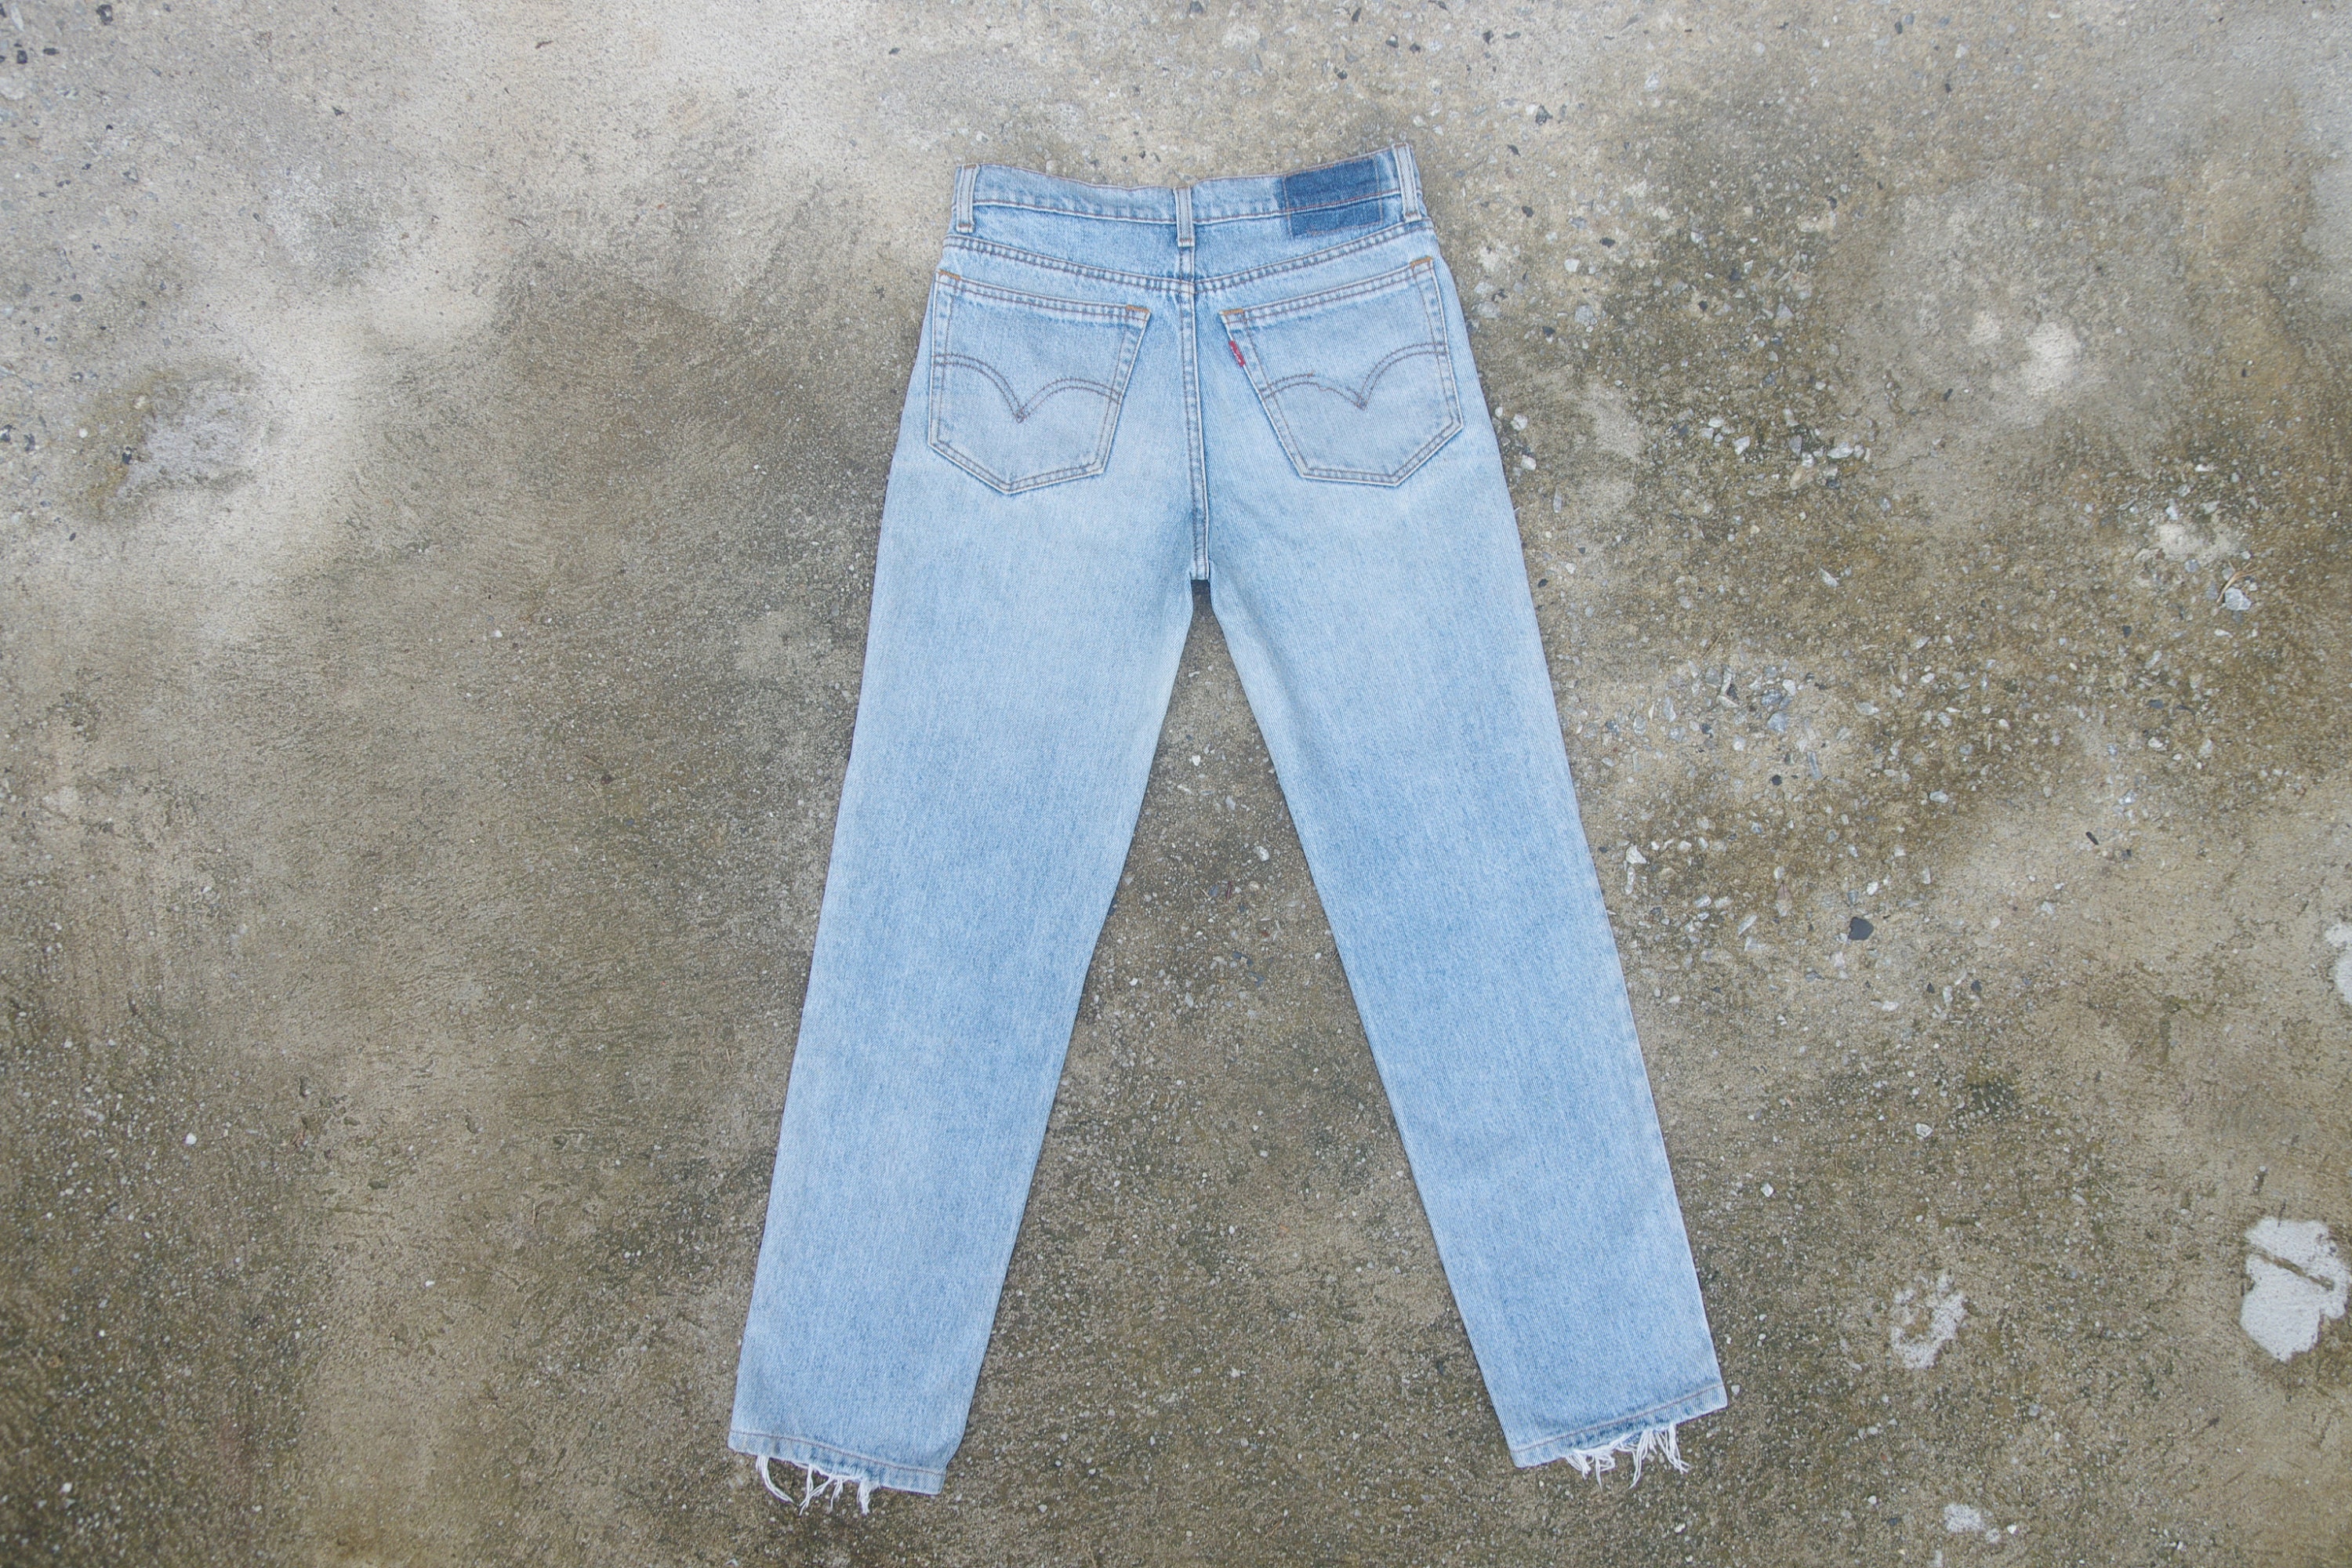 Faded Jeansvintage Levis 505 W27 W27.5levis - Etsy